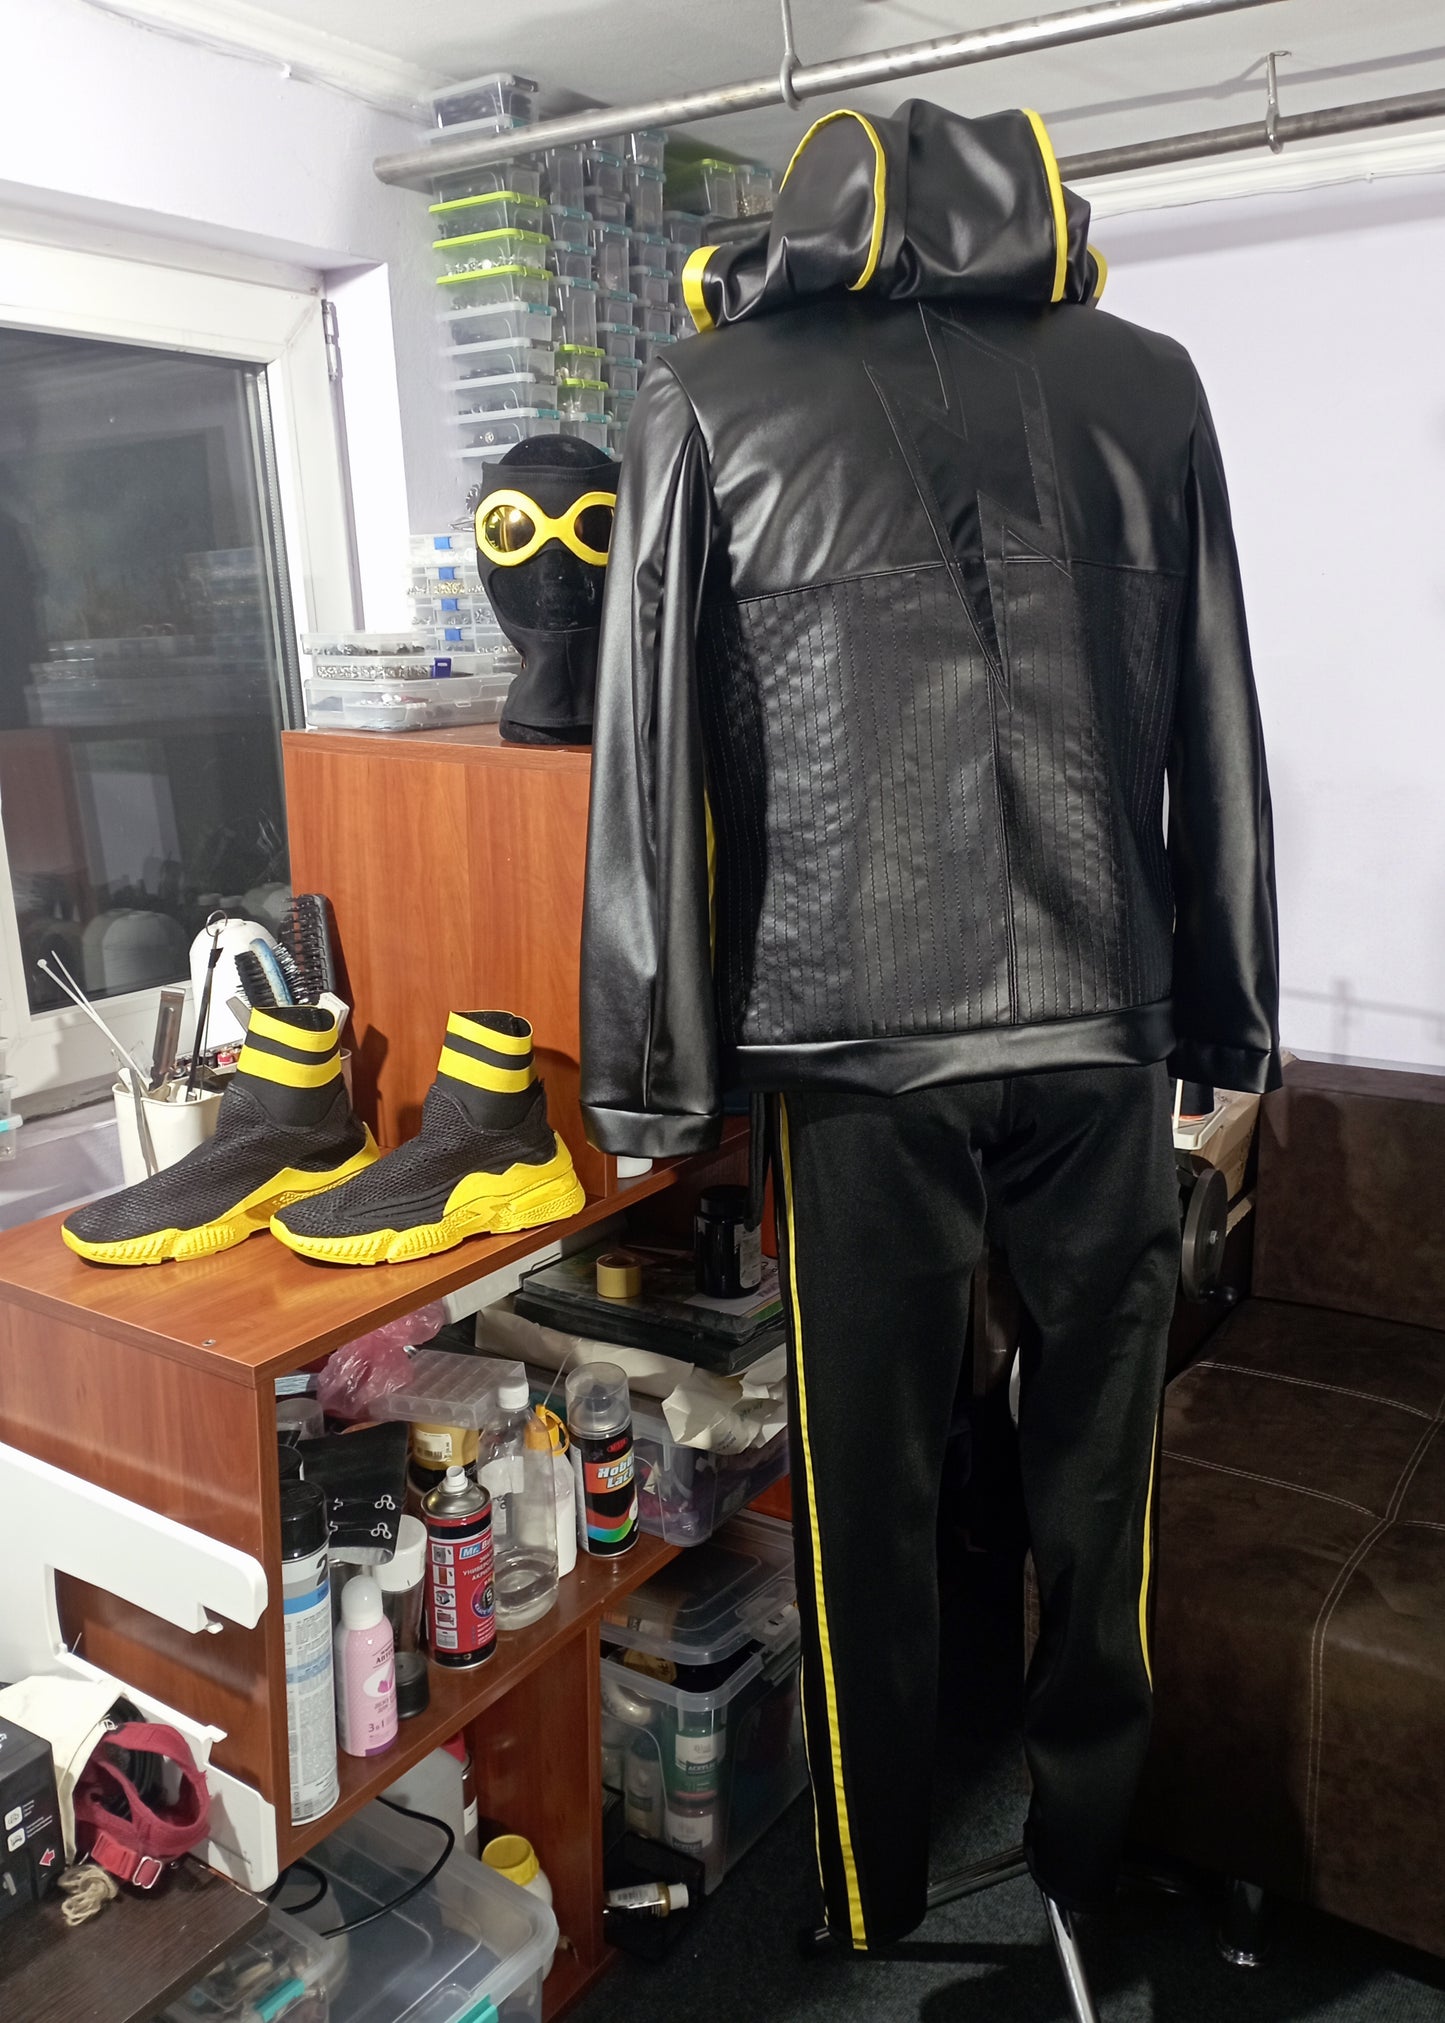 Static shock cosplay outfit / cosplay / comix cosplay / hand made cosplay / custom made cosplay